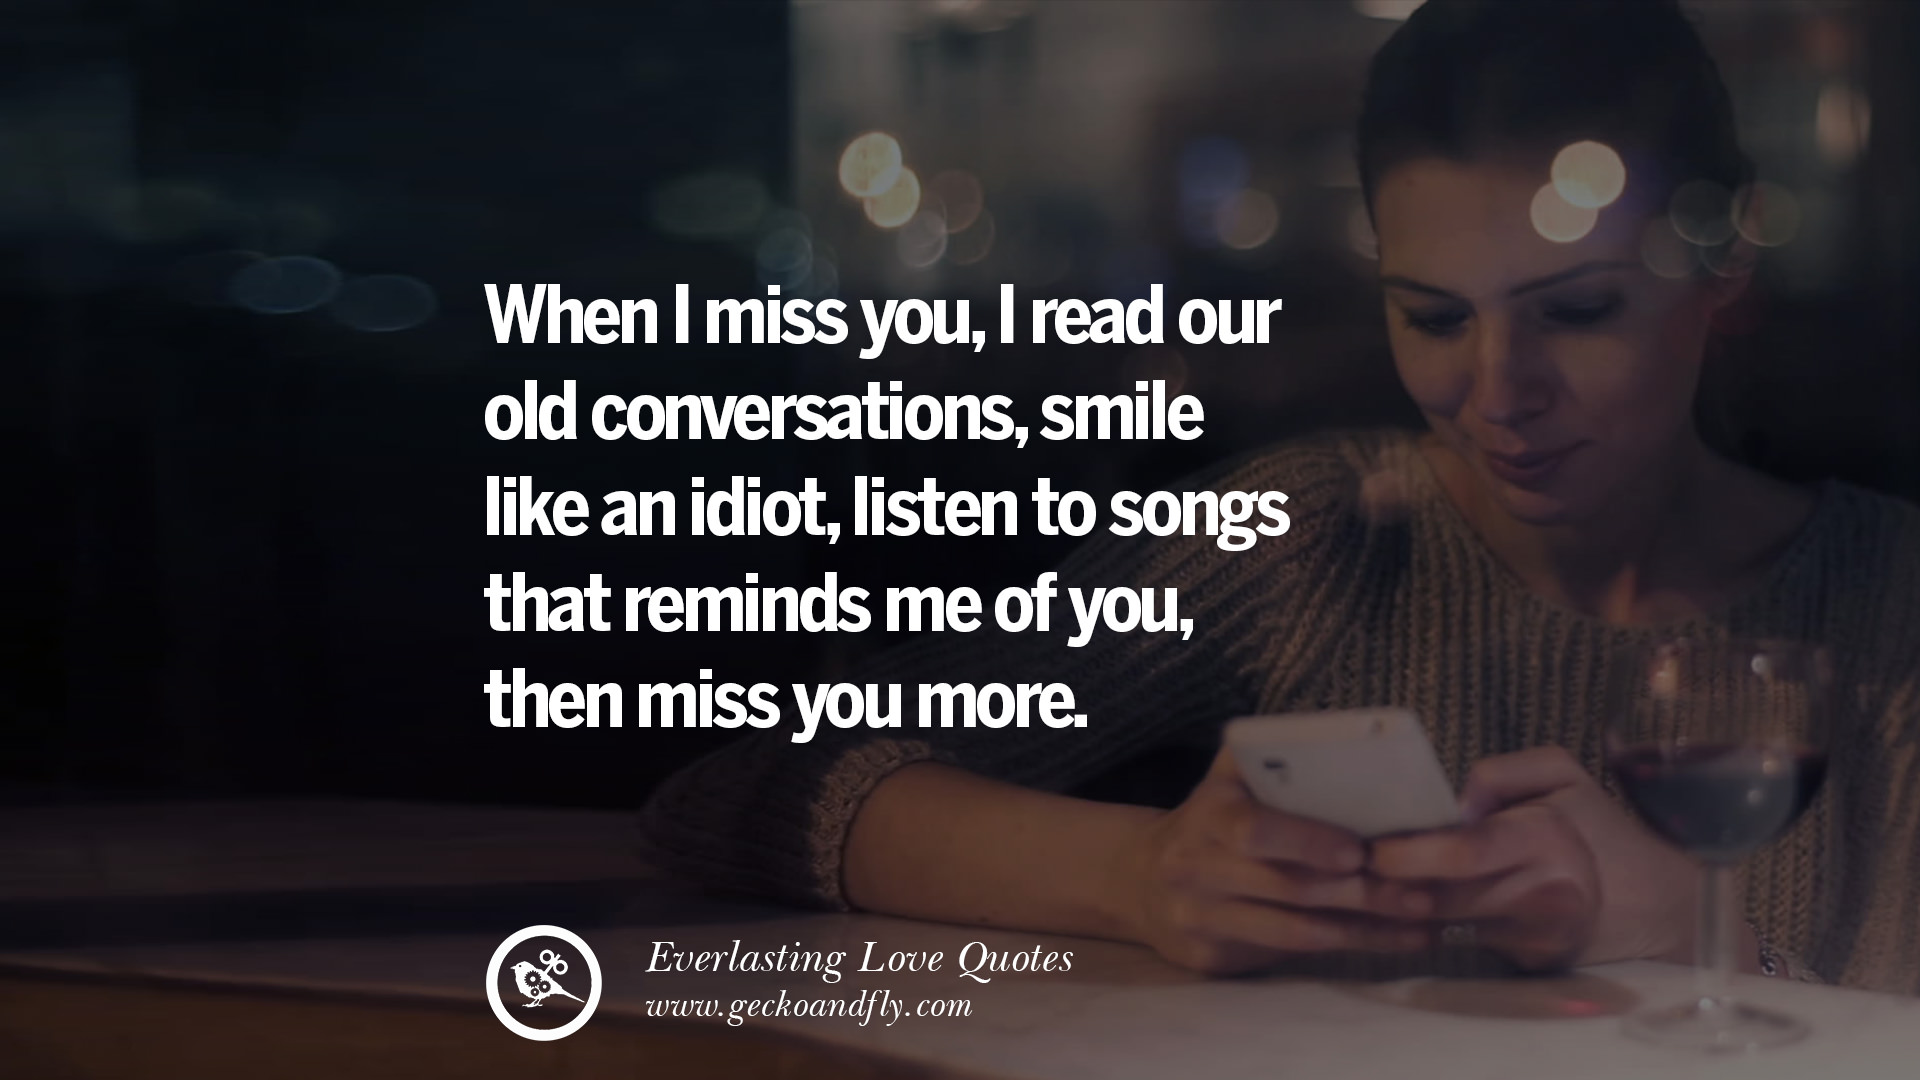 When I miss you I read our old conversations smile like an idiot